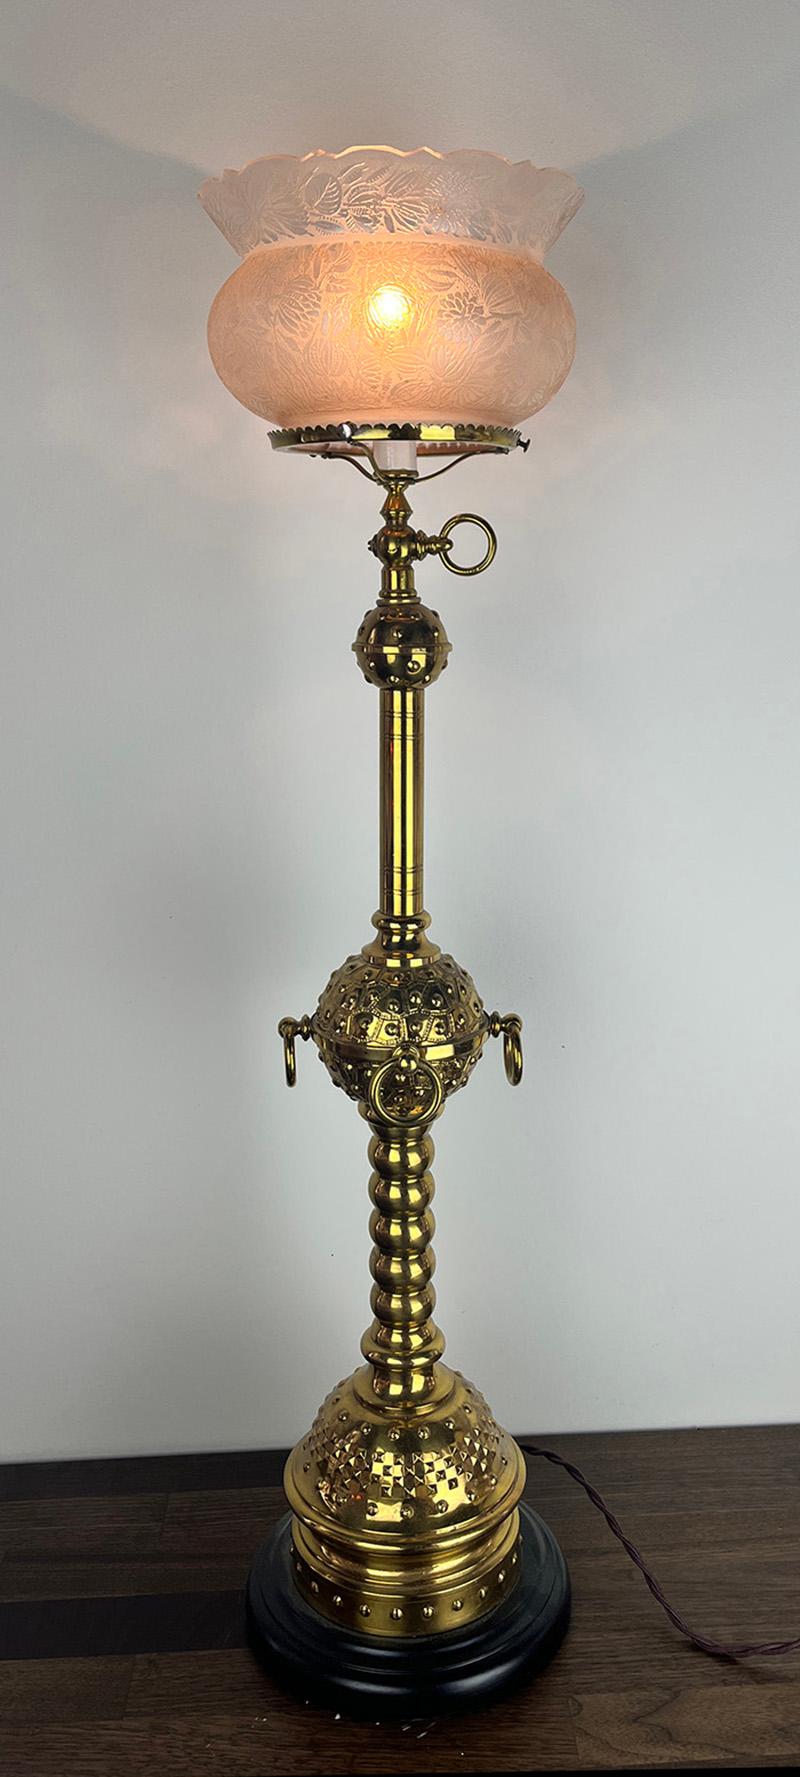 Incredible Eastlake / Aesthetic Movement converted gas newel post light with honeycomb and ring center body. This gem in made in the style of Thackera / Oxley Enos and Giddings which were prominent American lighting manufacturers of the day. All